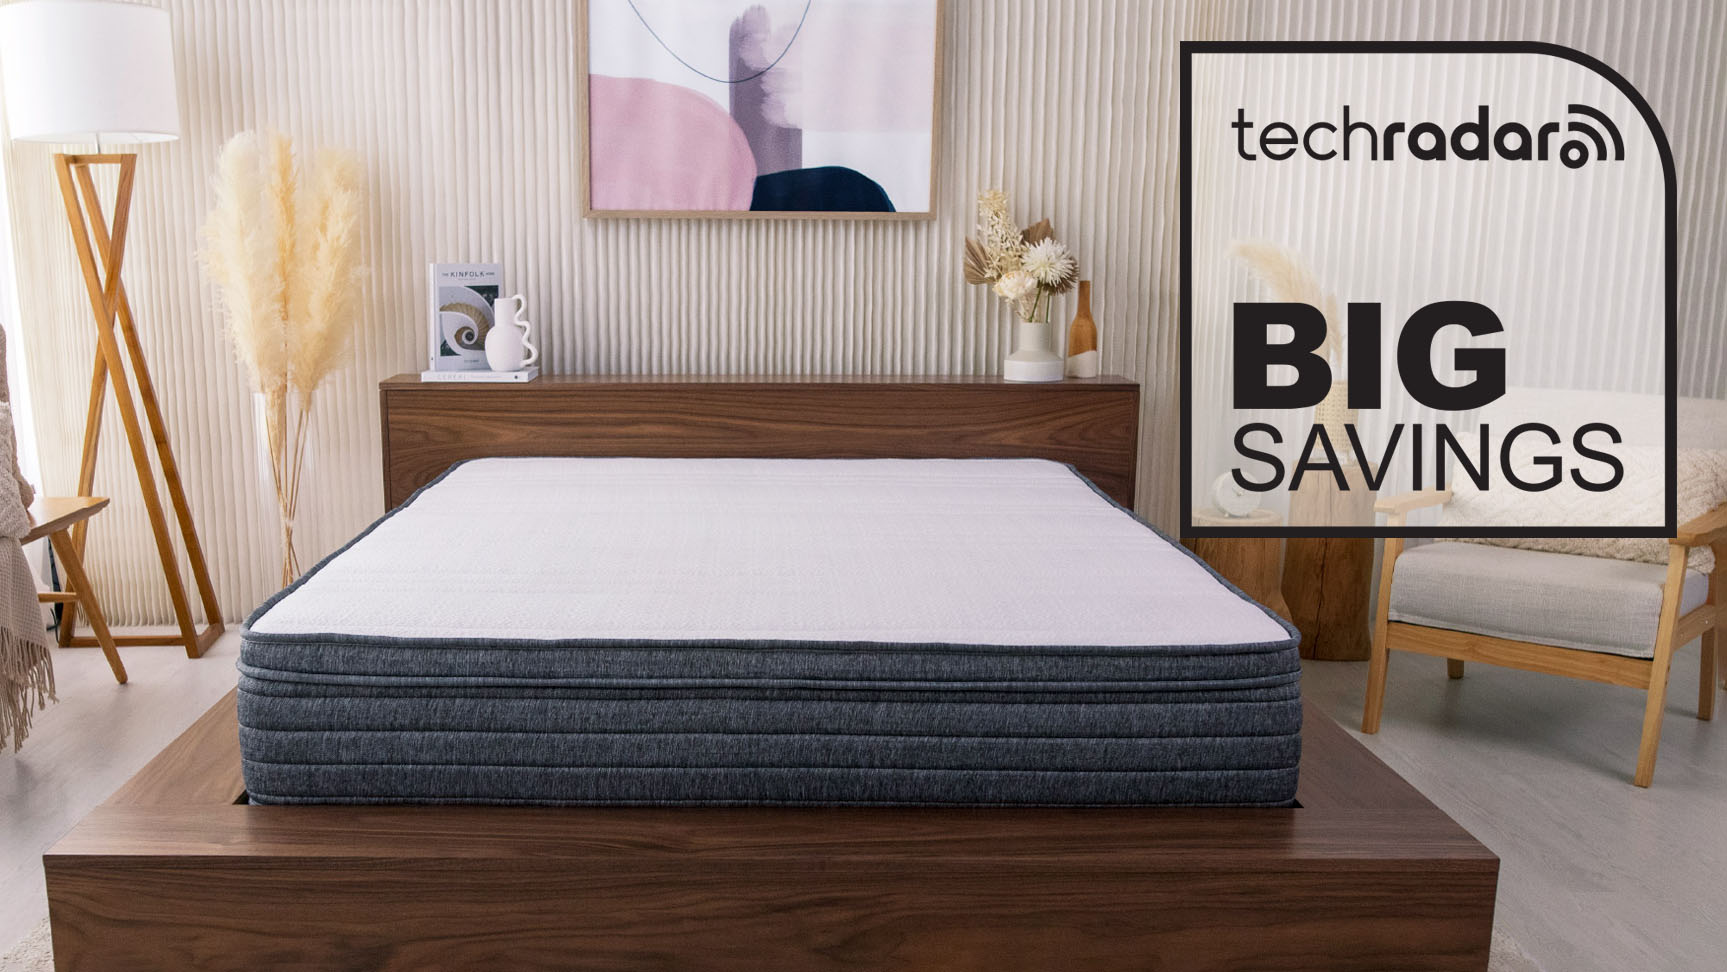 This great-value orthopaedic mattress is even cheaper right now